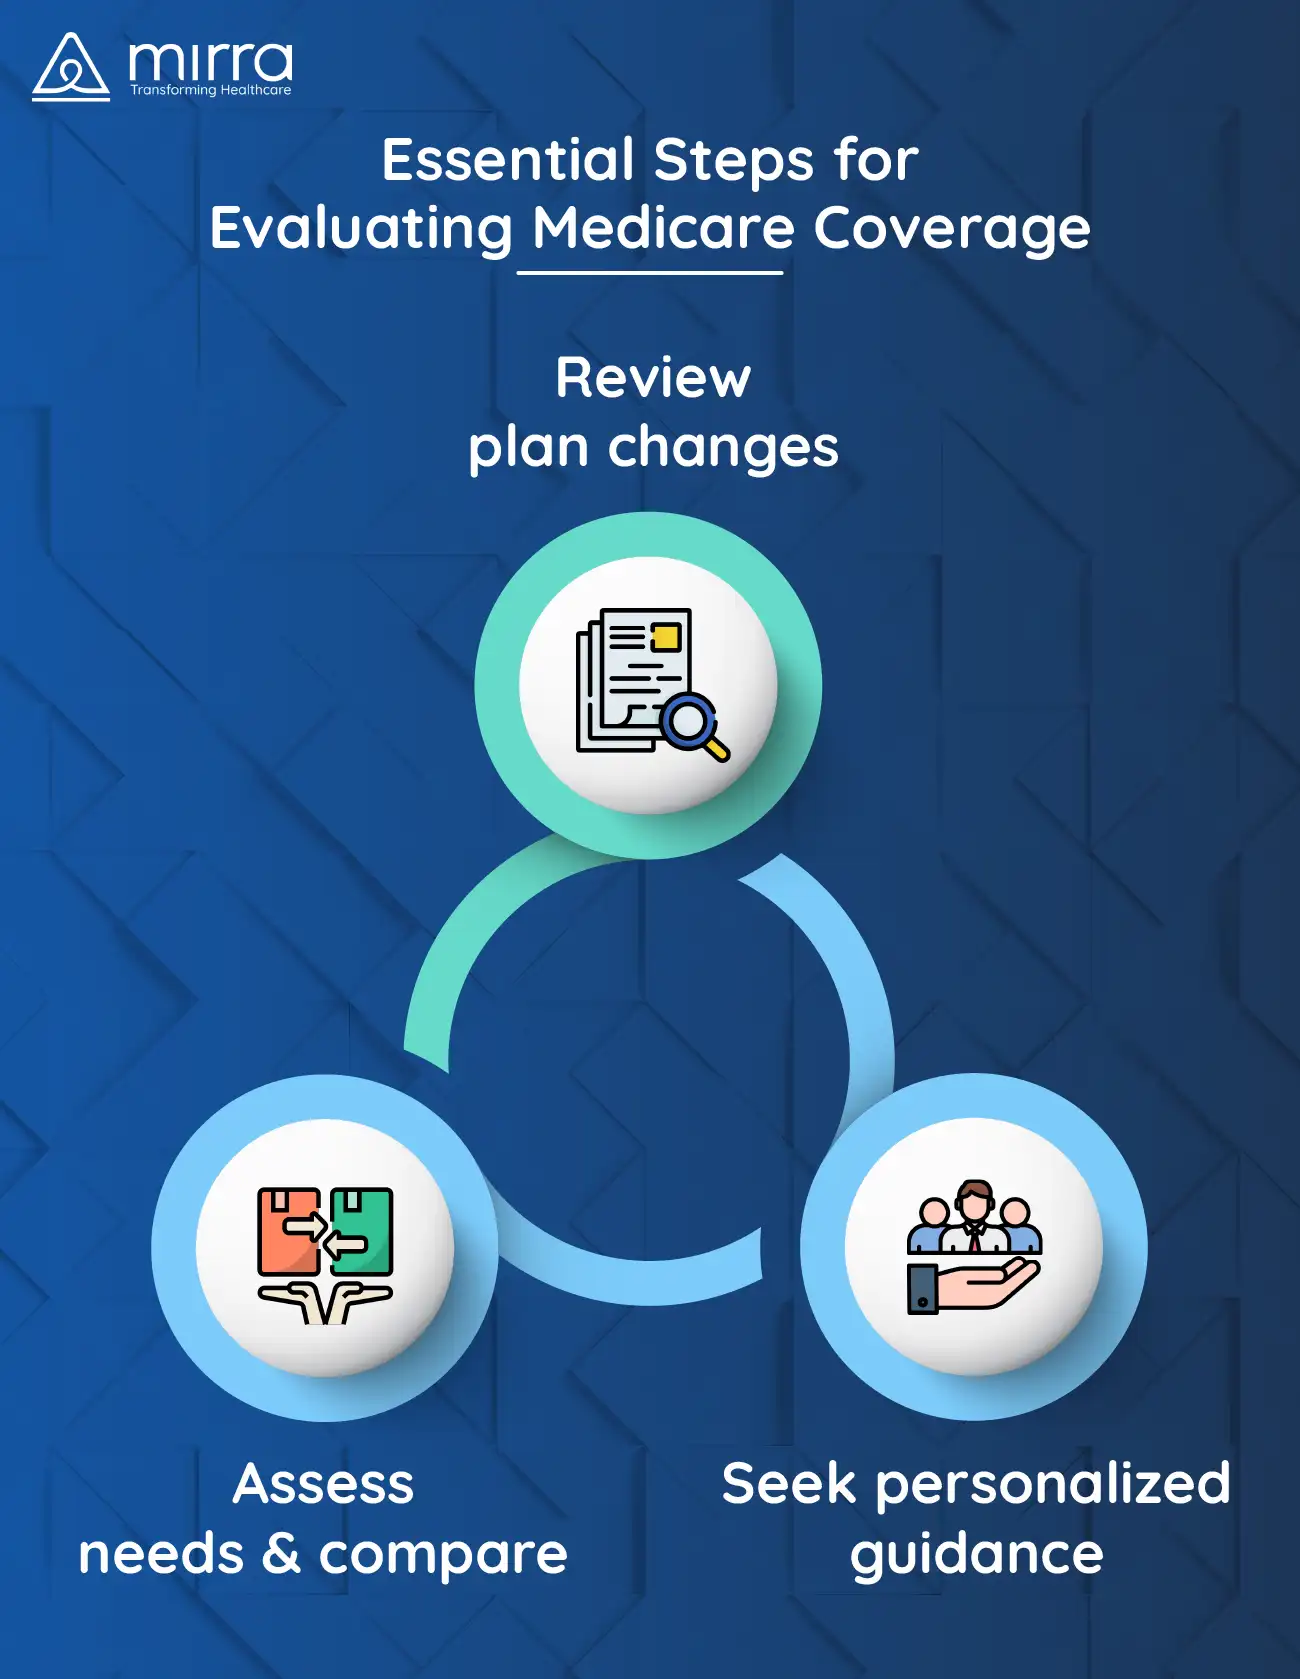 Steps to Take When Evaluating Medicare Coverage for the Upcoming Year